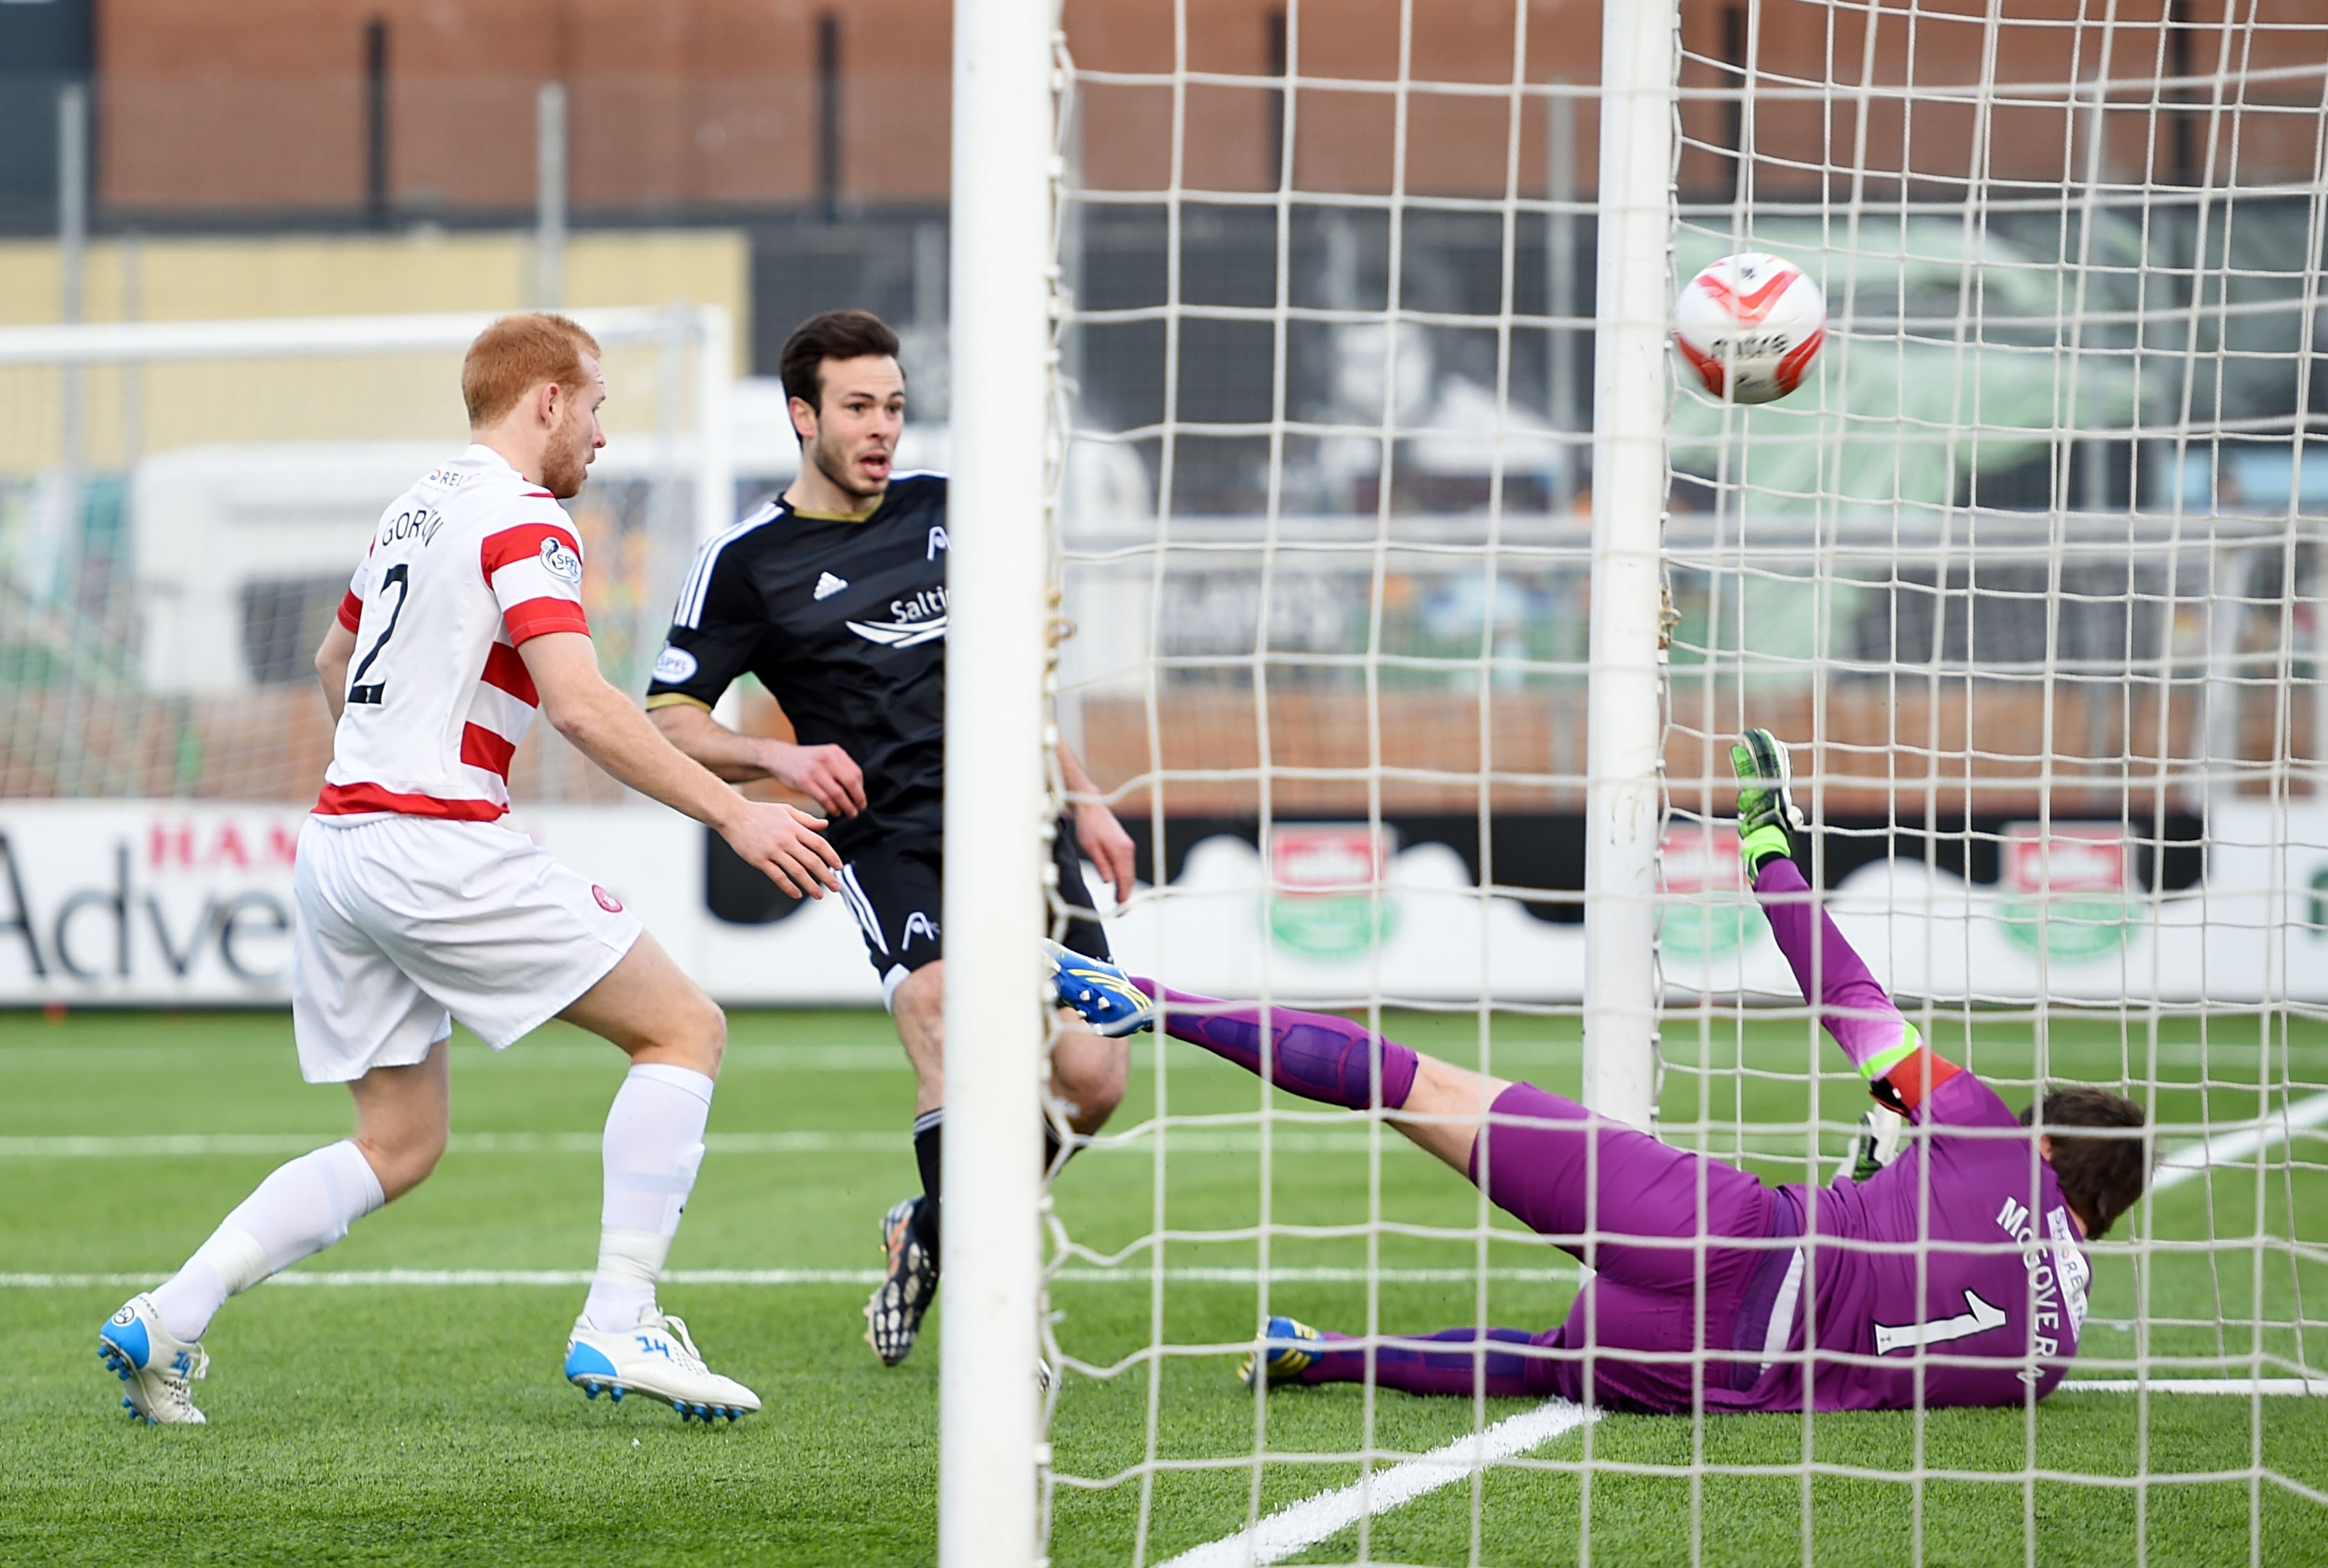 Andy Considine fires home from close range to open the scoring